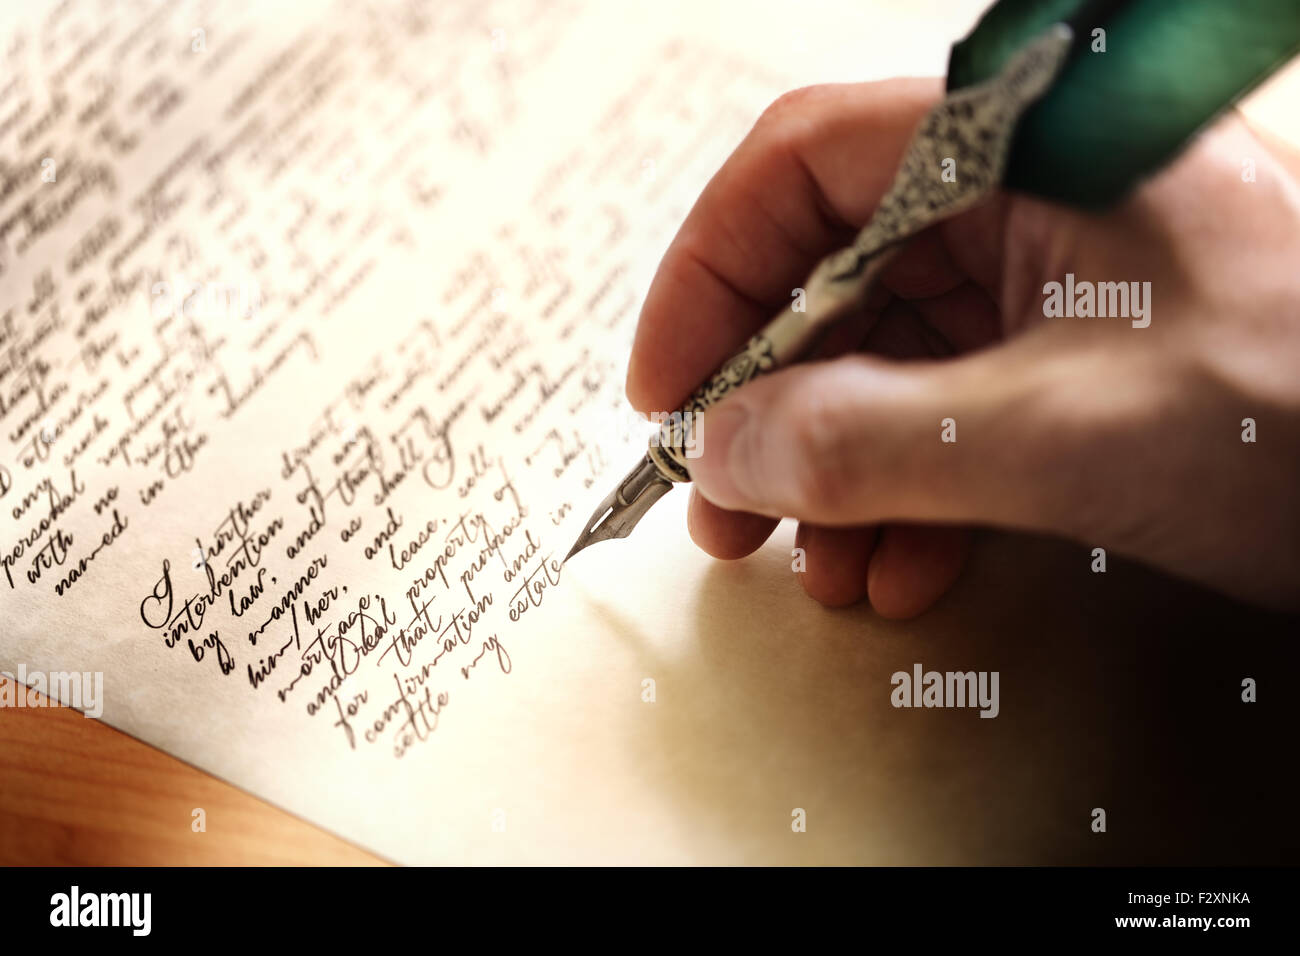 Quill Writing High Resolution Stock Photography and Images - Alamy